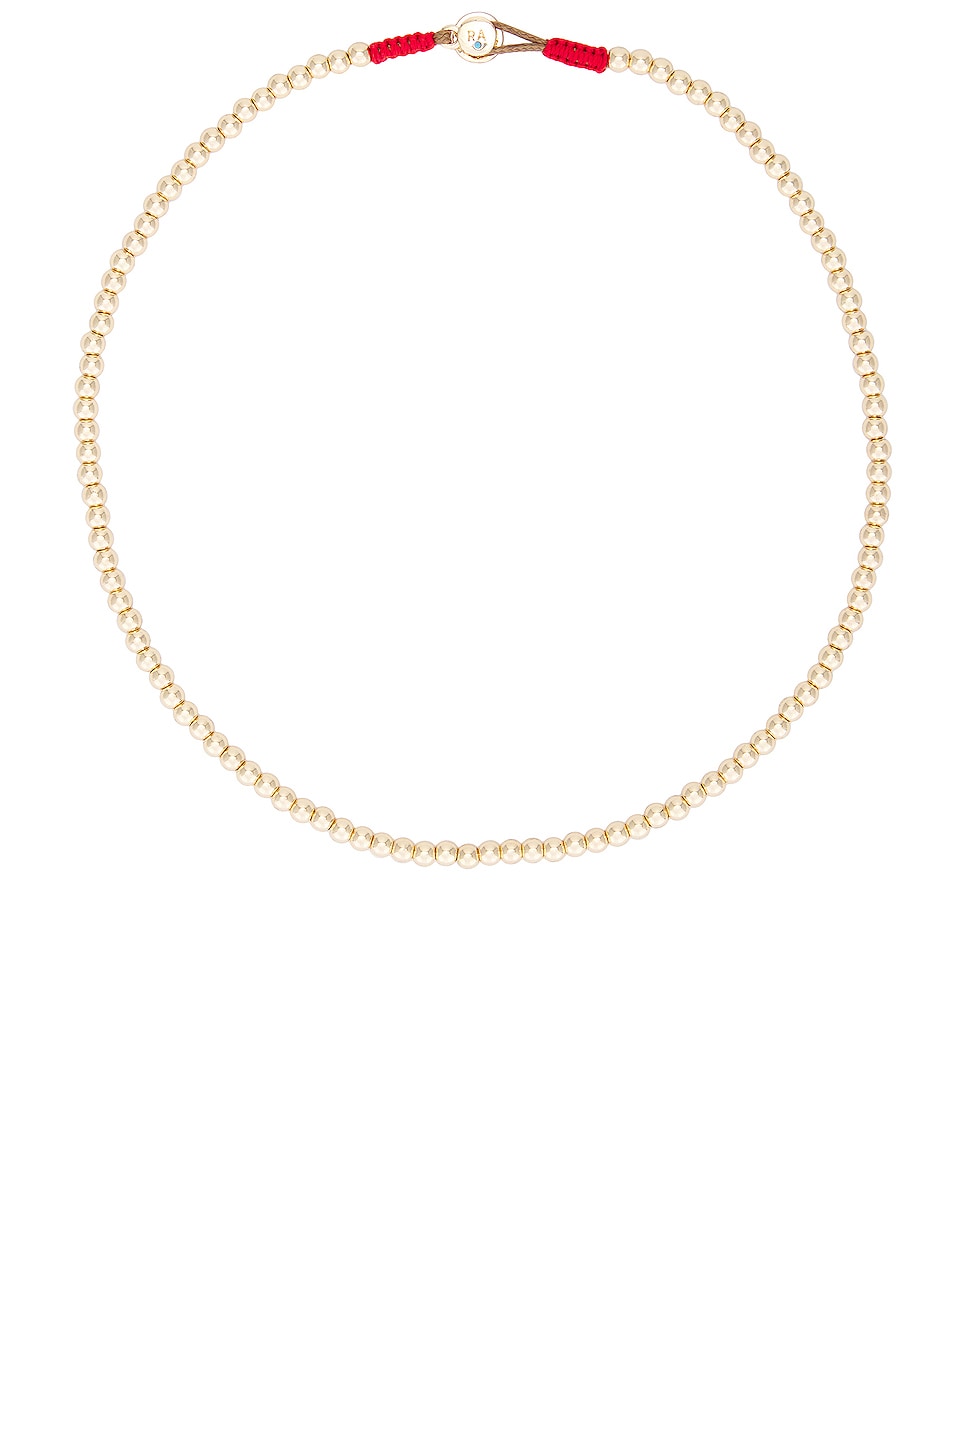 Image 1 of Roxanne Assoulin Baby Bead Necklace in Gold